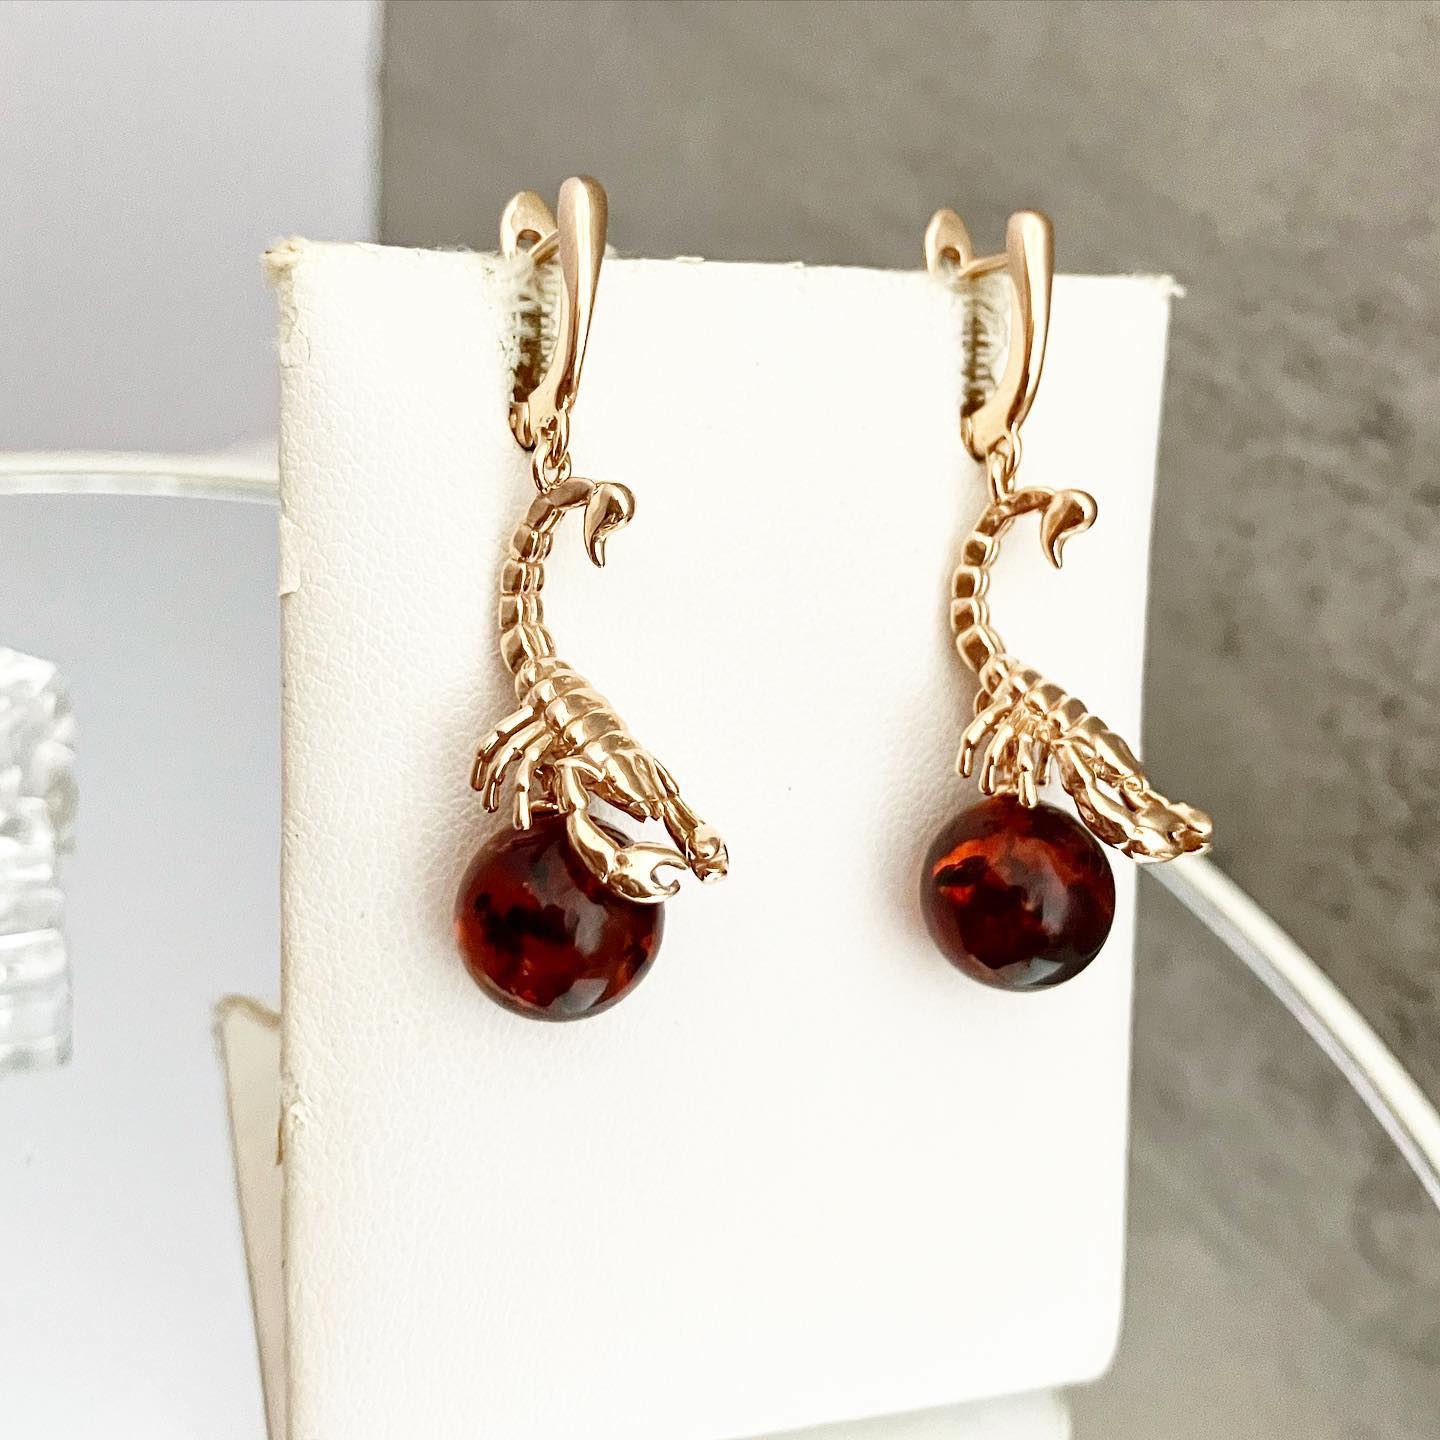 Earrings made of silver with gilding and natural amber.